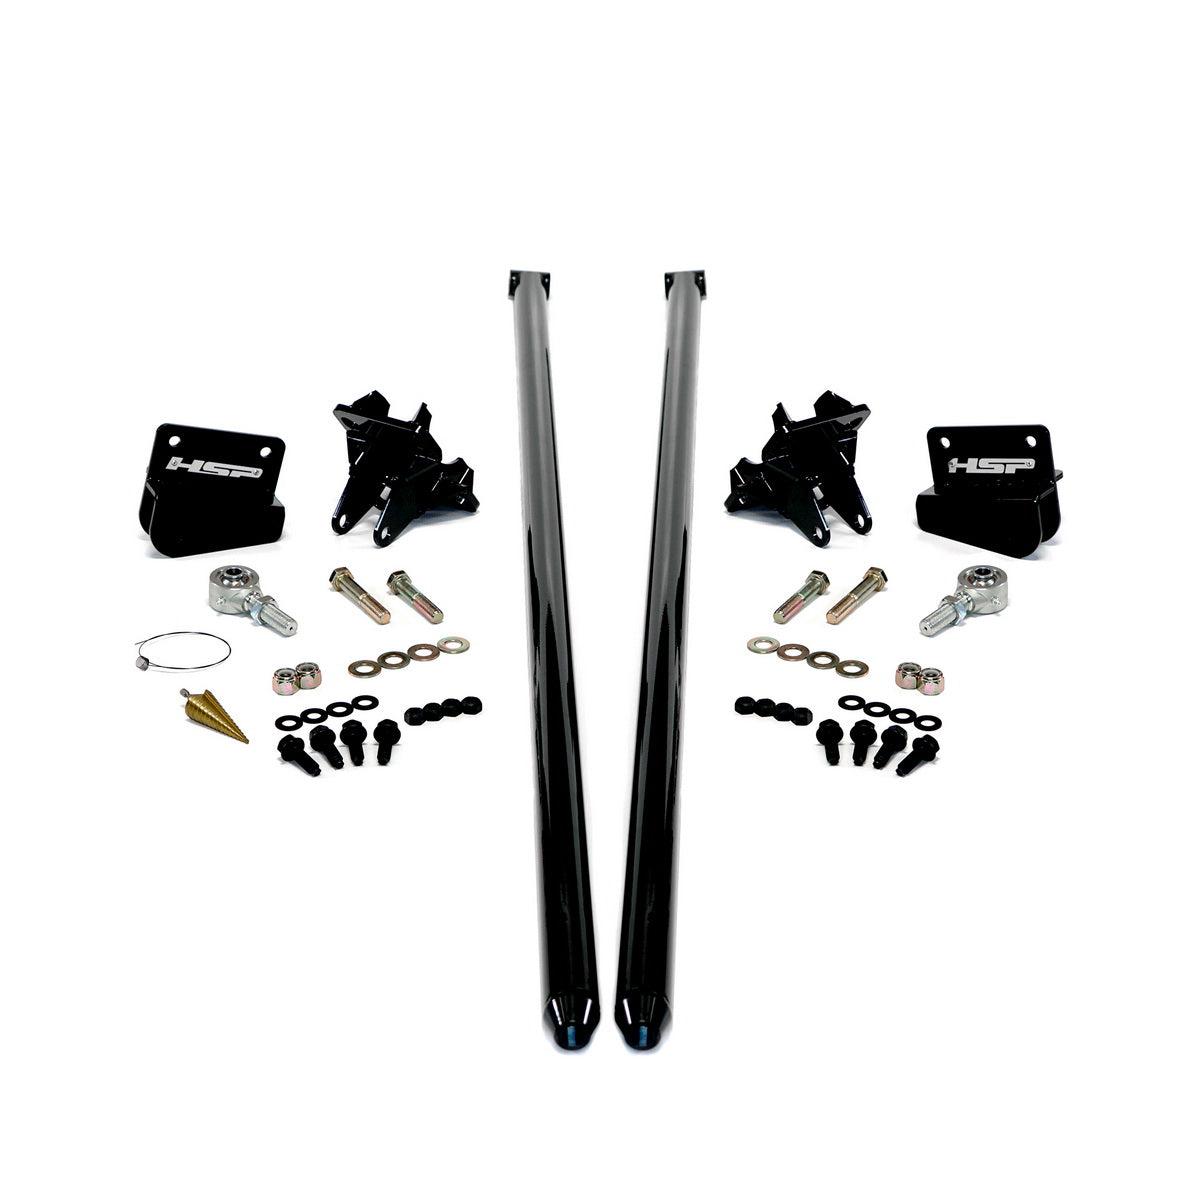 2011-2019 Duramax 70" Bolt-On Traction Bars 4" Axle Diameter (535-2-HSP)-Traction Bars-HSP Diesel-Dirty Diesel Customs